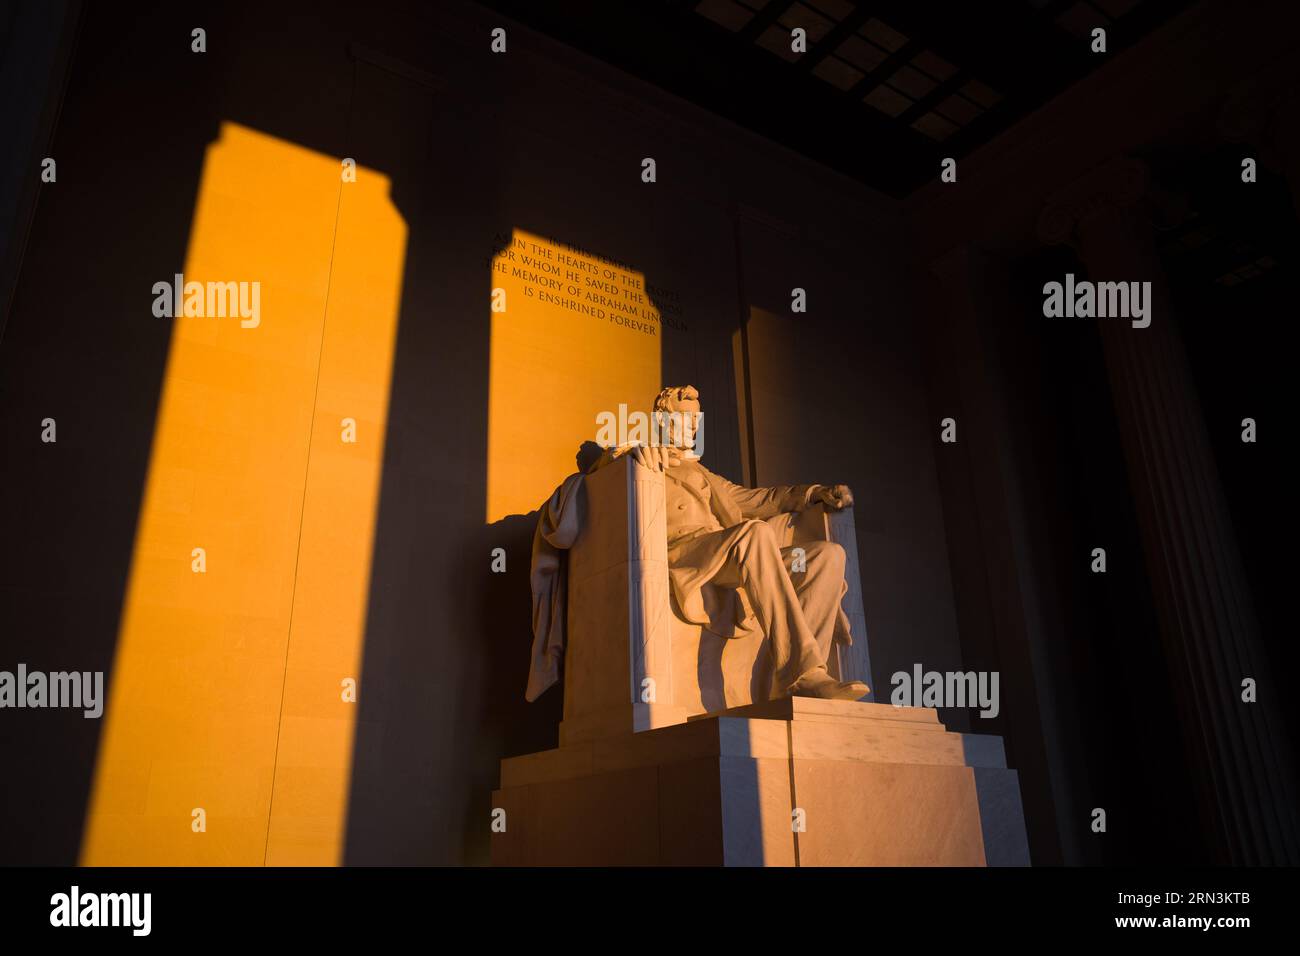 WASHINGTON DC, United States — The Lincoln Memorial statue, illuminated by the golden light of sunrise during the spring solstice, casts a warm glow over the historic monument. This specific solar event accentuates the features of the iconic tribute to America's 16th president, emphasizing Abraham Lincoln's role in the nation's history. Stock Photo